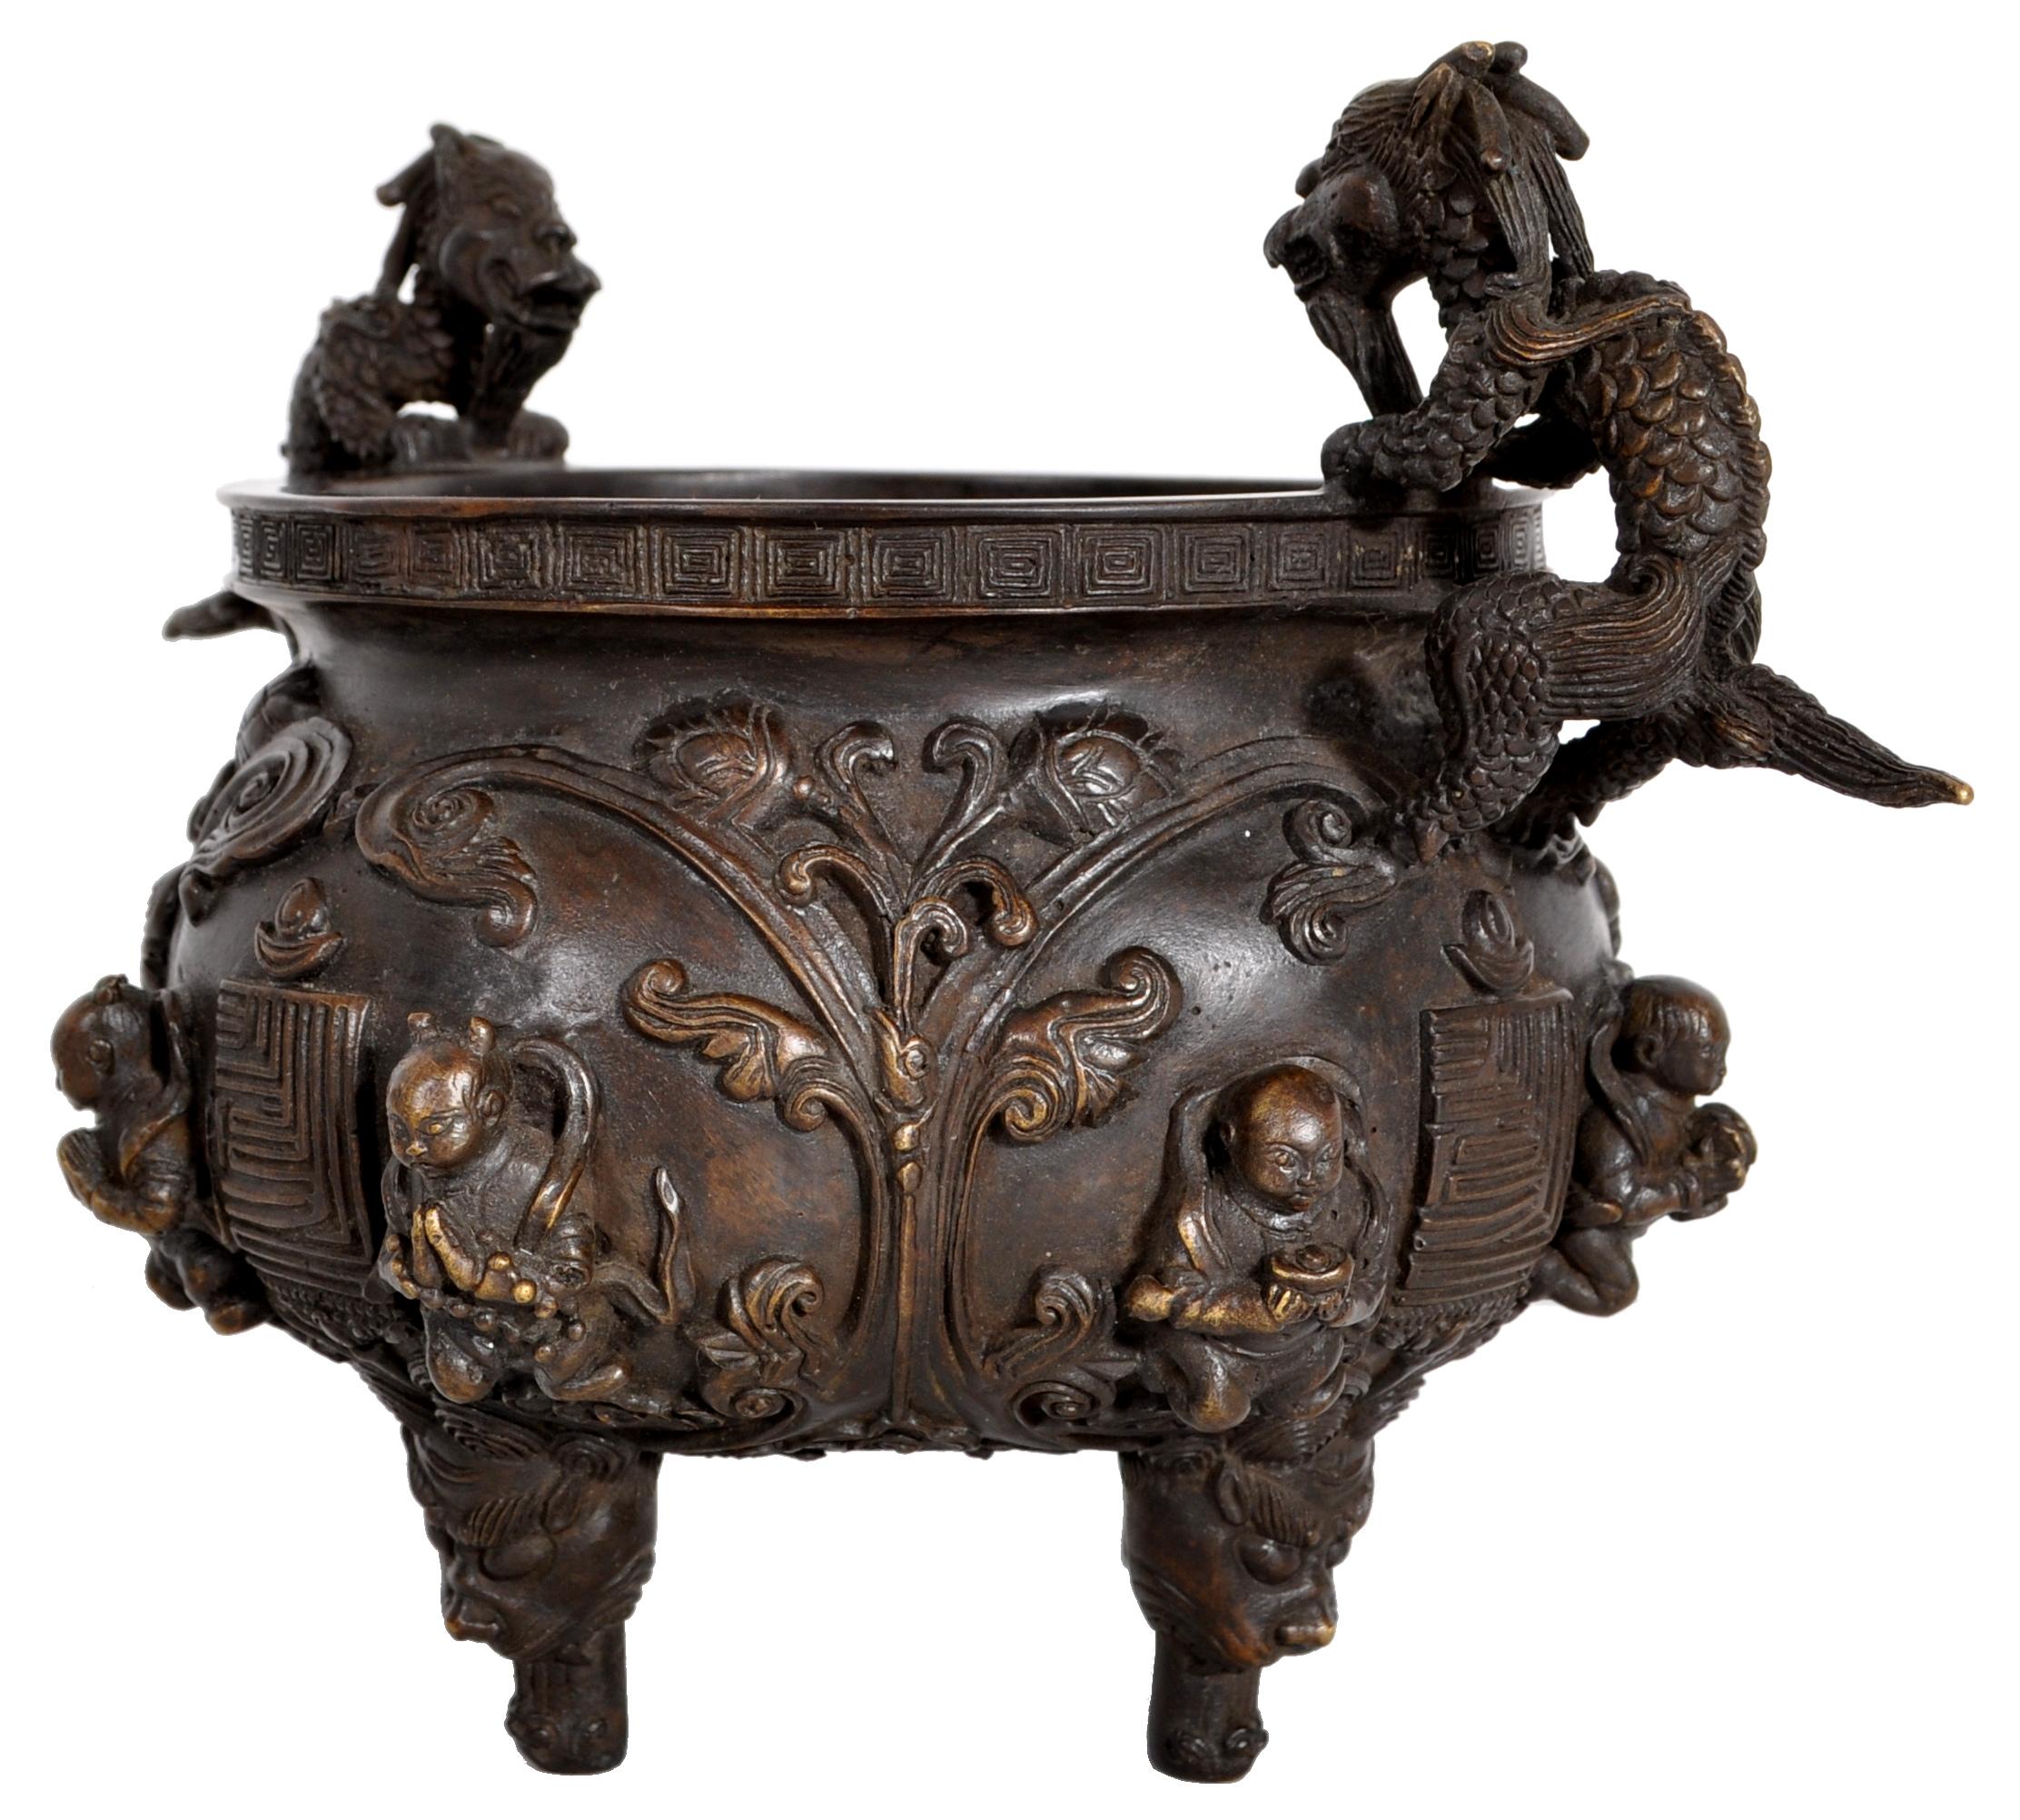 Archaistic Antique Chinese Bronze Qing Dynasty Dragon Censer Incense Burner Buddhistic 1800